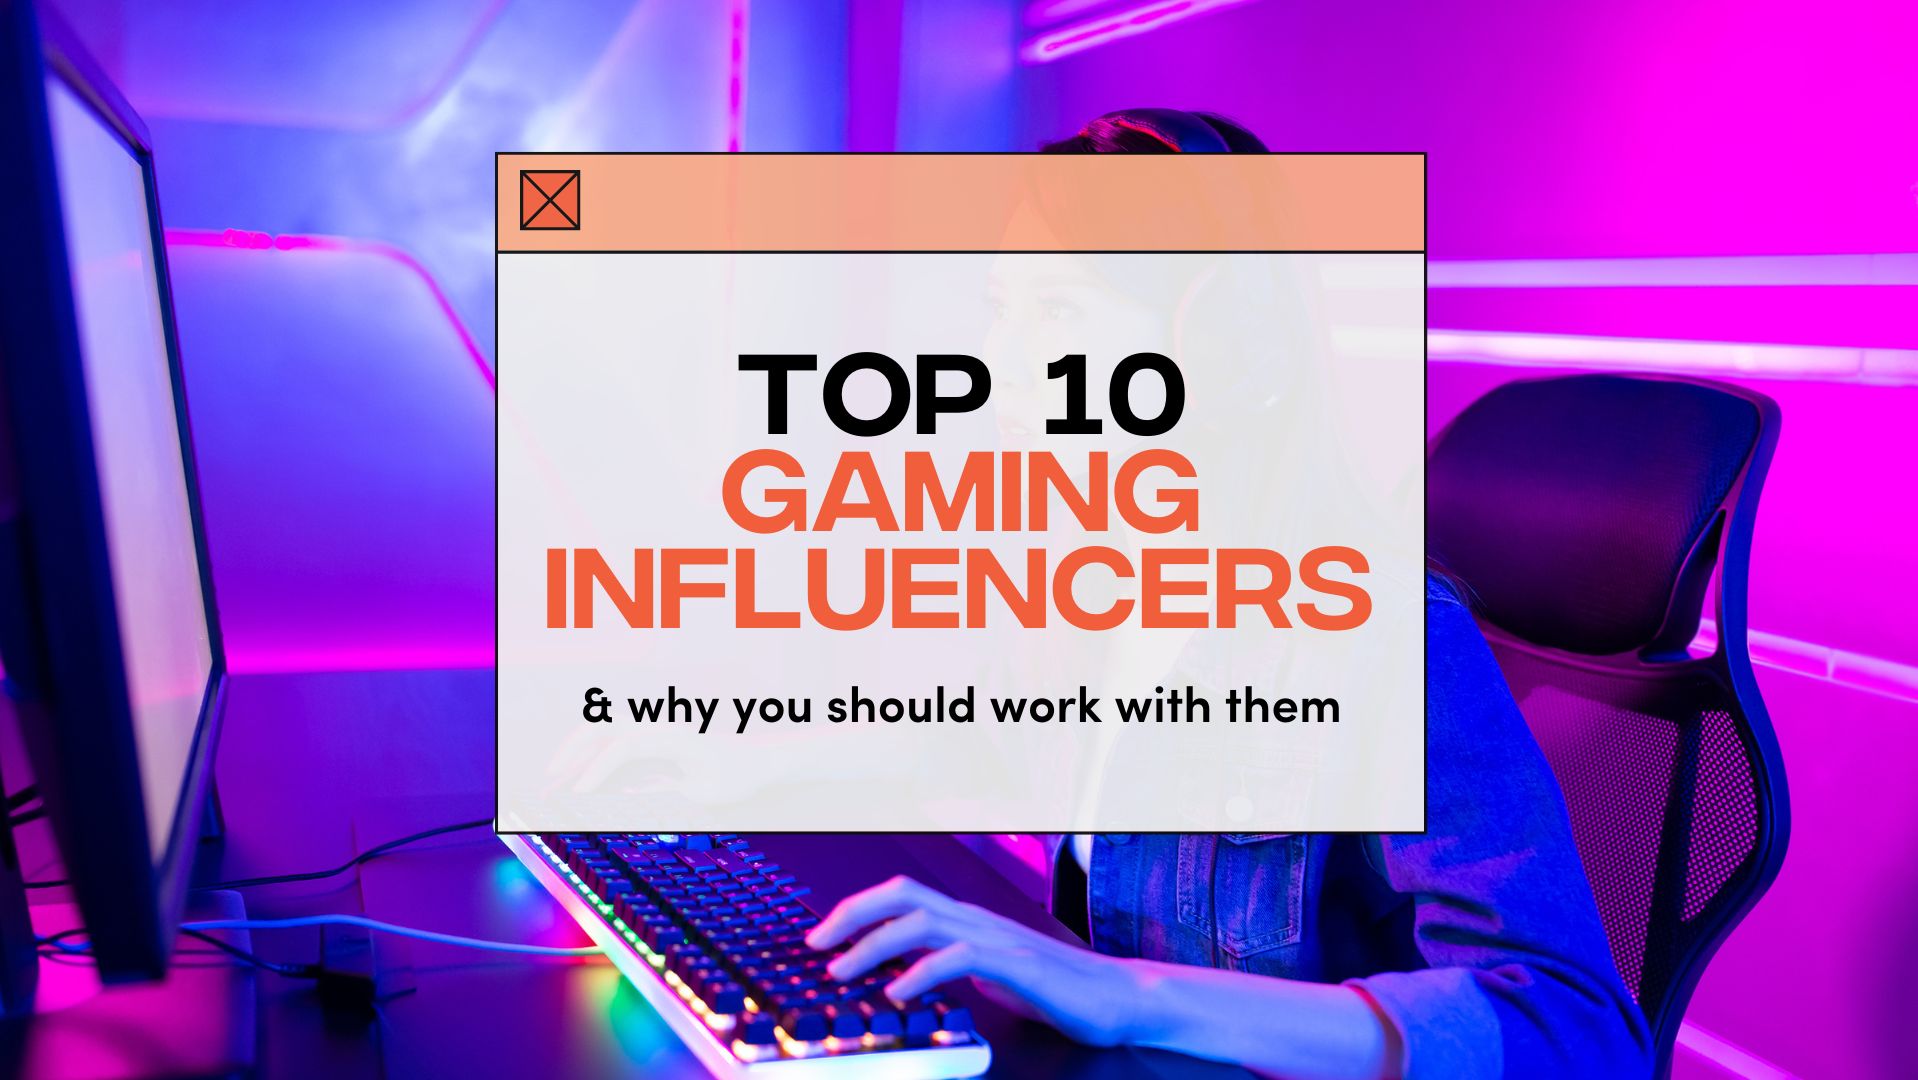 Top 10 Gaming Influencers And Why Your Brand Should Work With Them